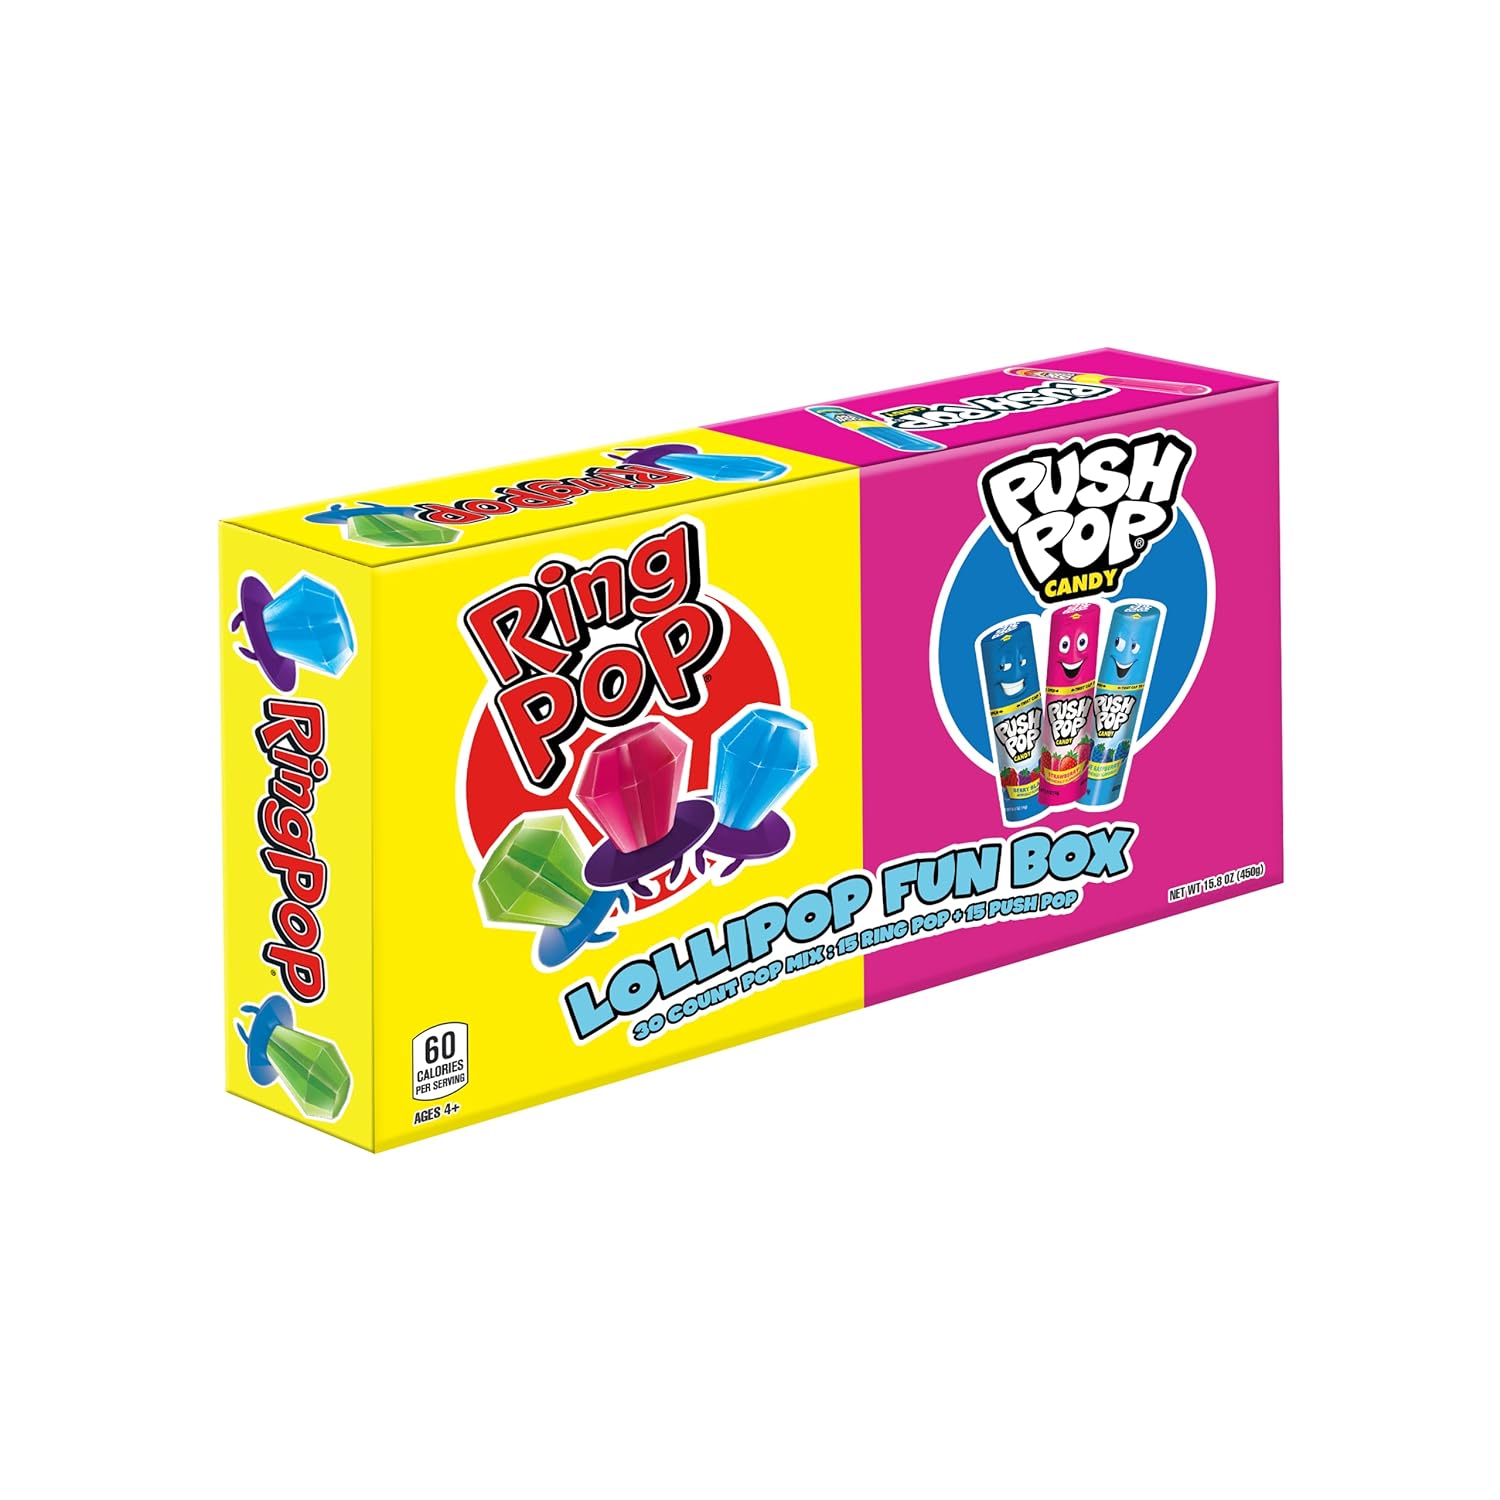 Wholesale prices with free shipping all over United States Bazooka Candy Brands Halloween Candy Box - 18 Count Lollipops W/ Assorted Flavors From Ring Pop, Push Pop, Baby Bottle Pop & Juicy Drop - Candy Gift Box For Halloween - Steven Deals